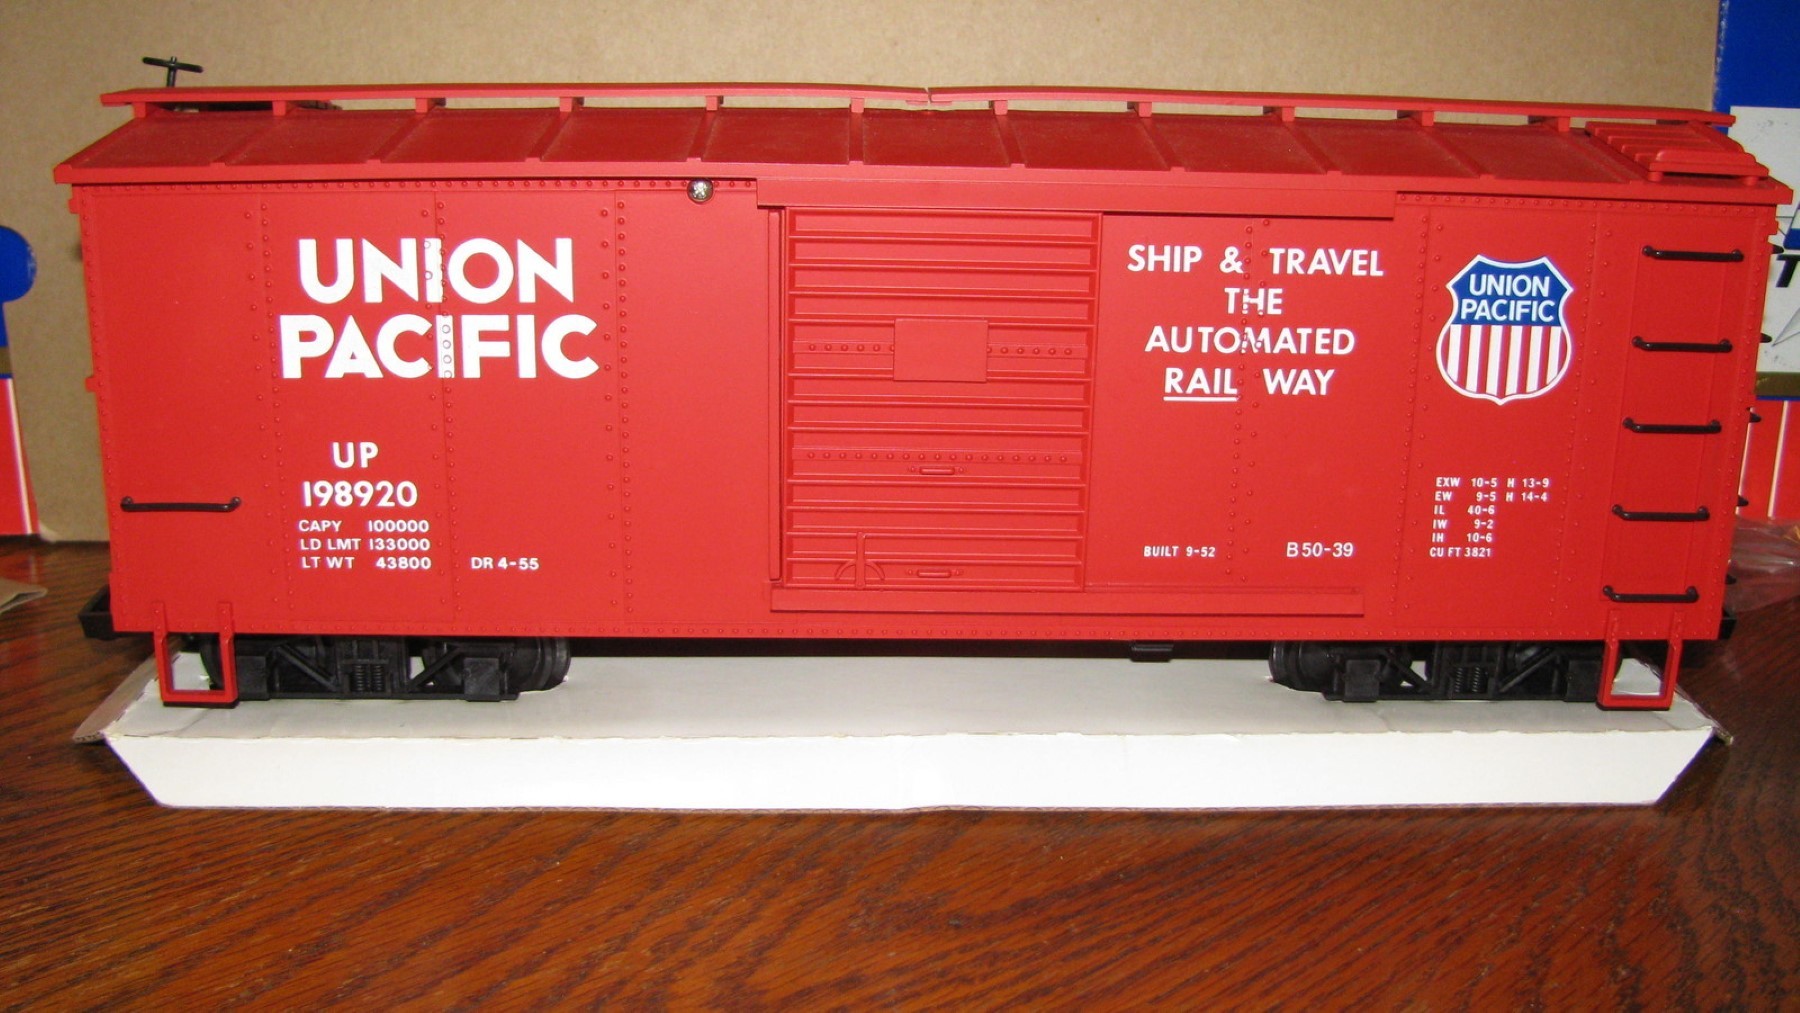 R1972 Union Pacific UP 198920